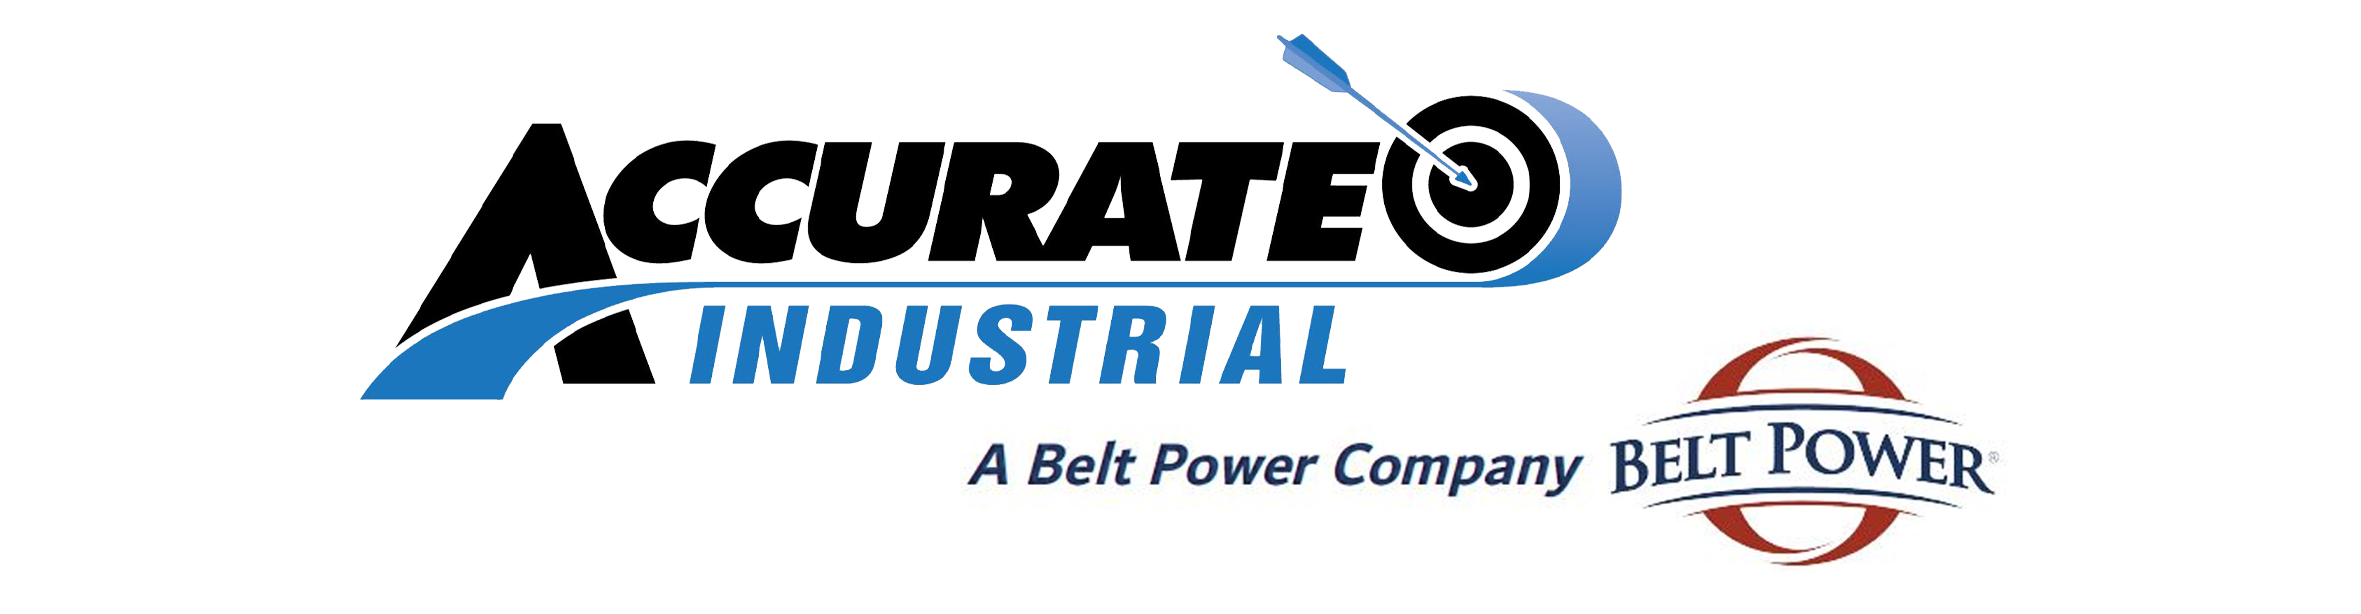 Accurate Industrial A Belt Power Company